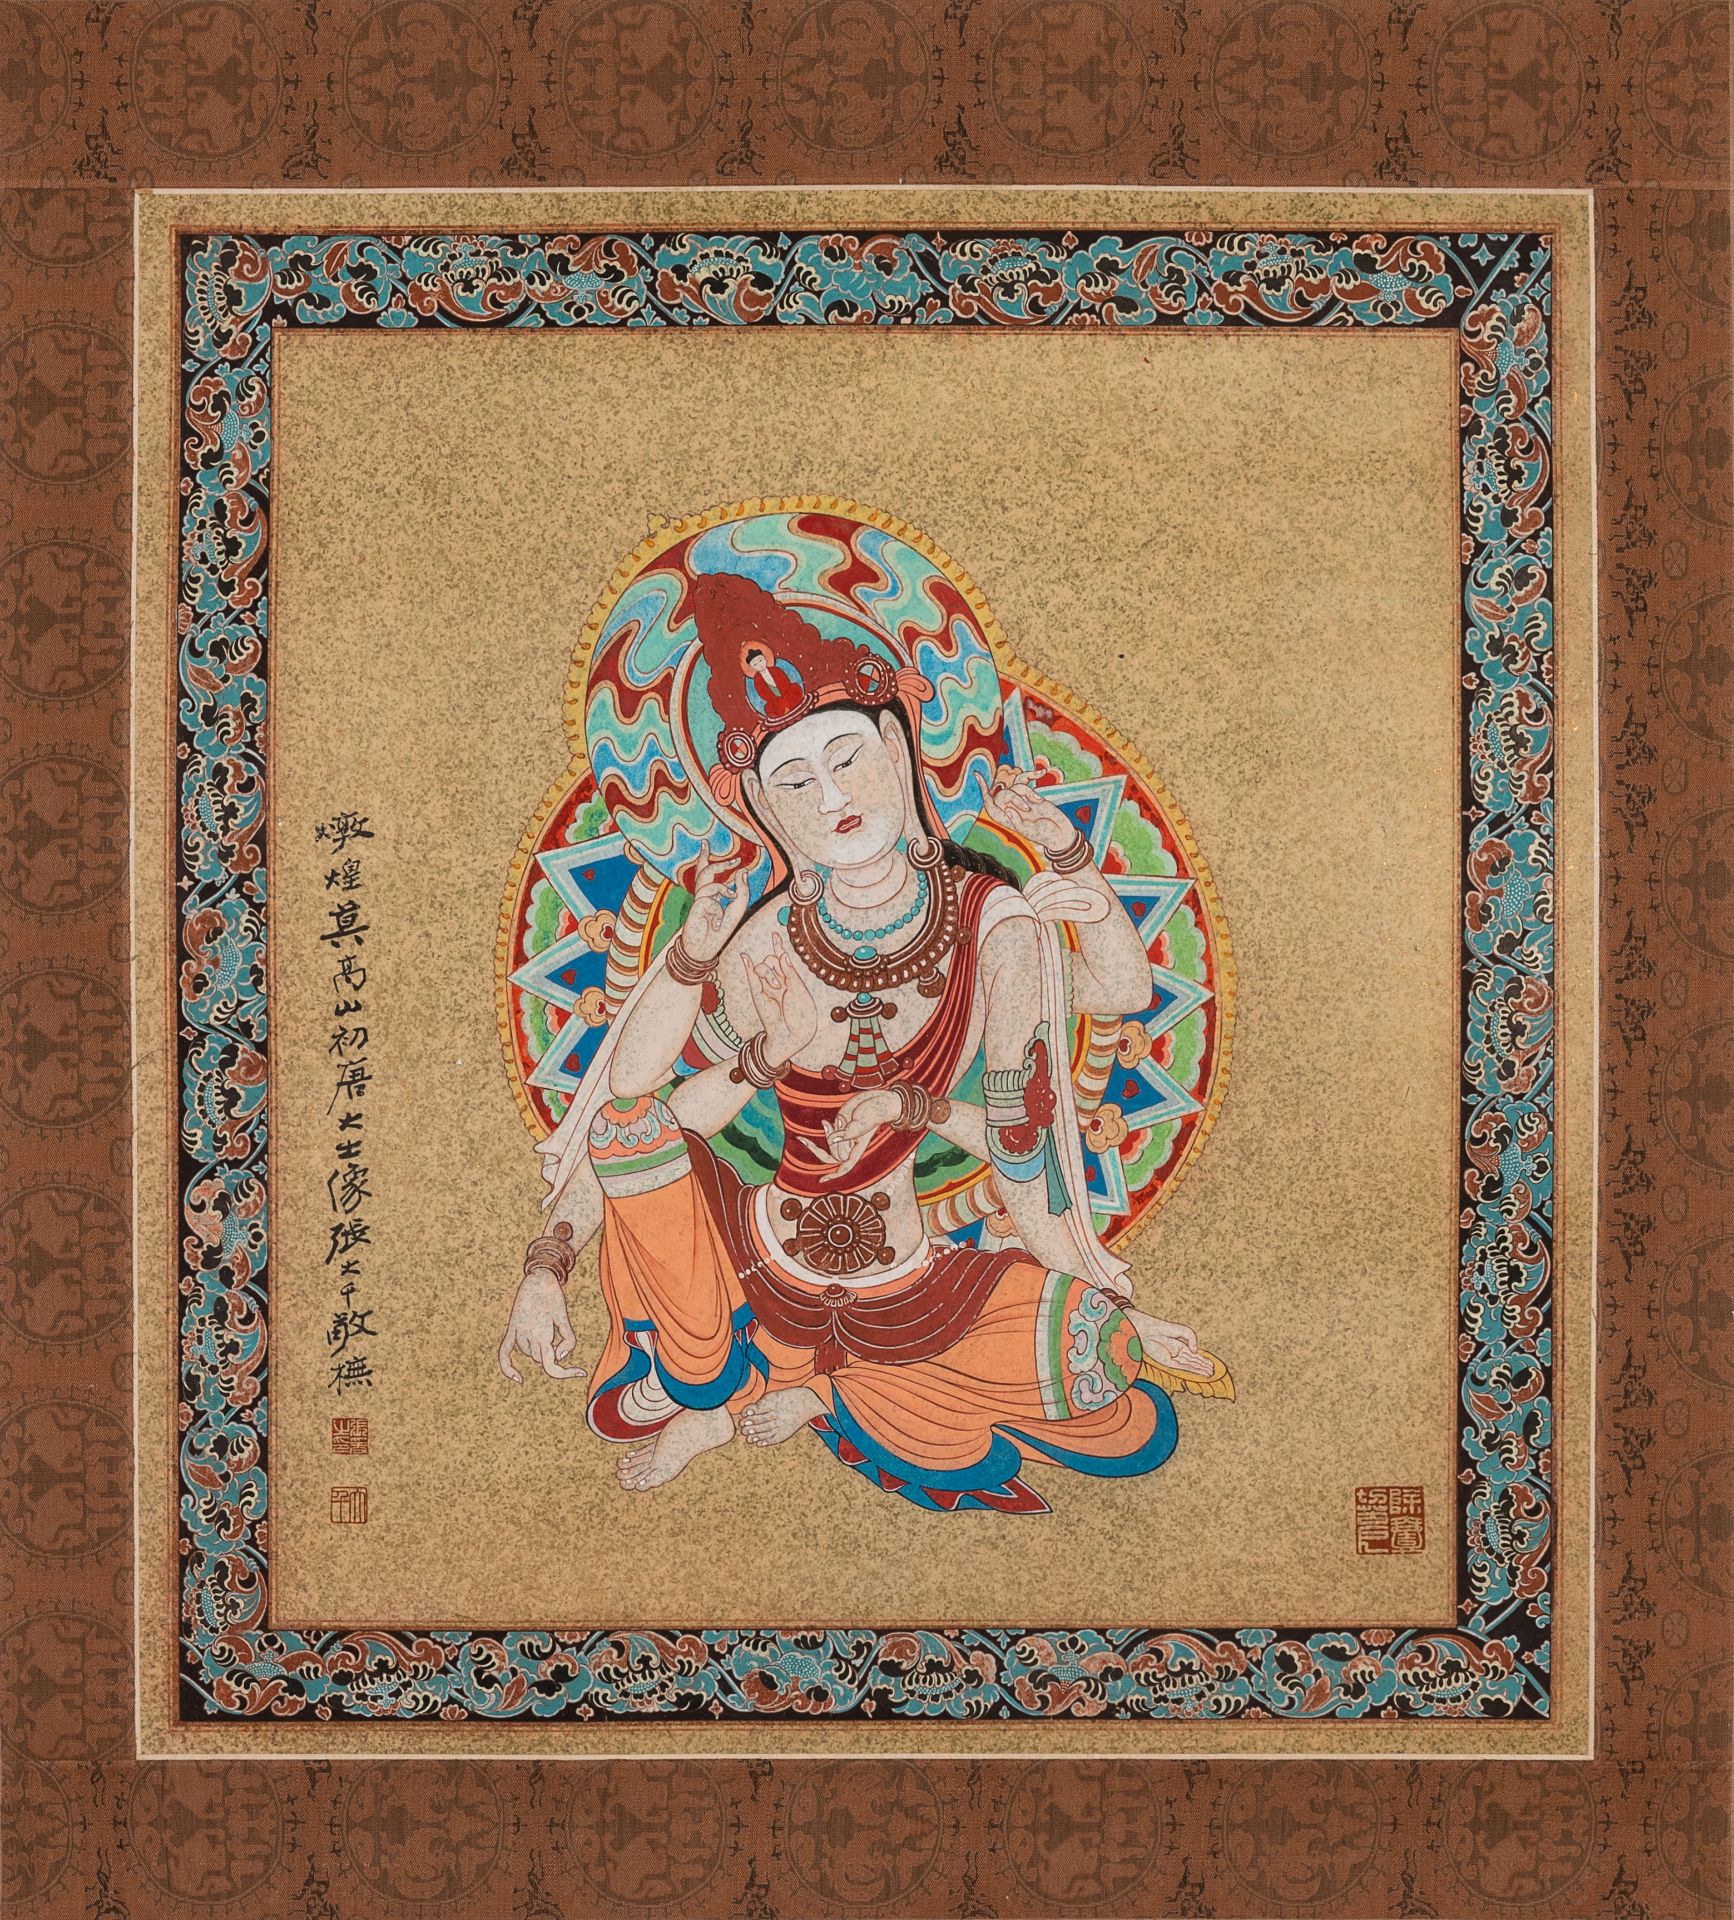 Zhang Daqian (1898-1983): 'Bodhisattva', ink and colour on gold paper - Image 3 of 6